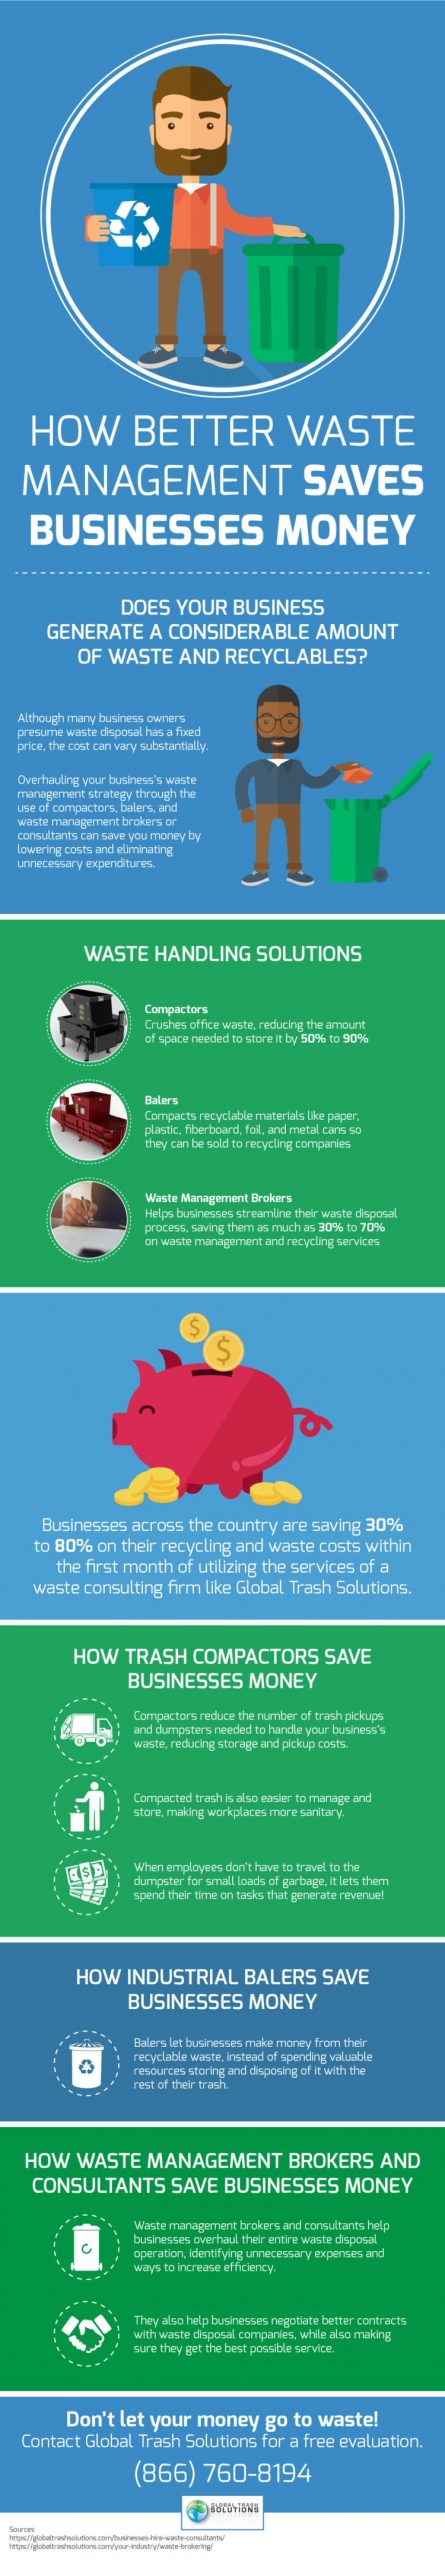 How Better Waste Management Saves Businesses Money infographic